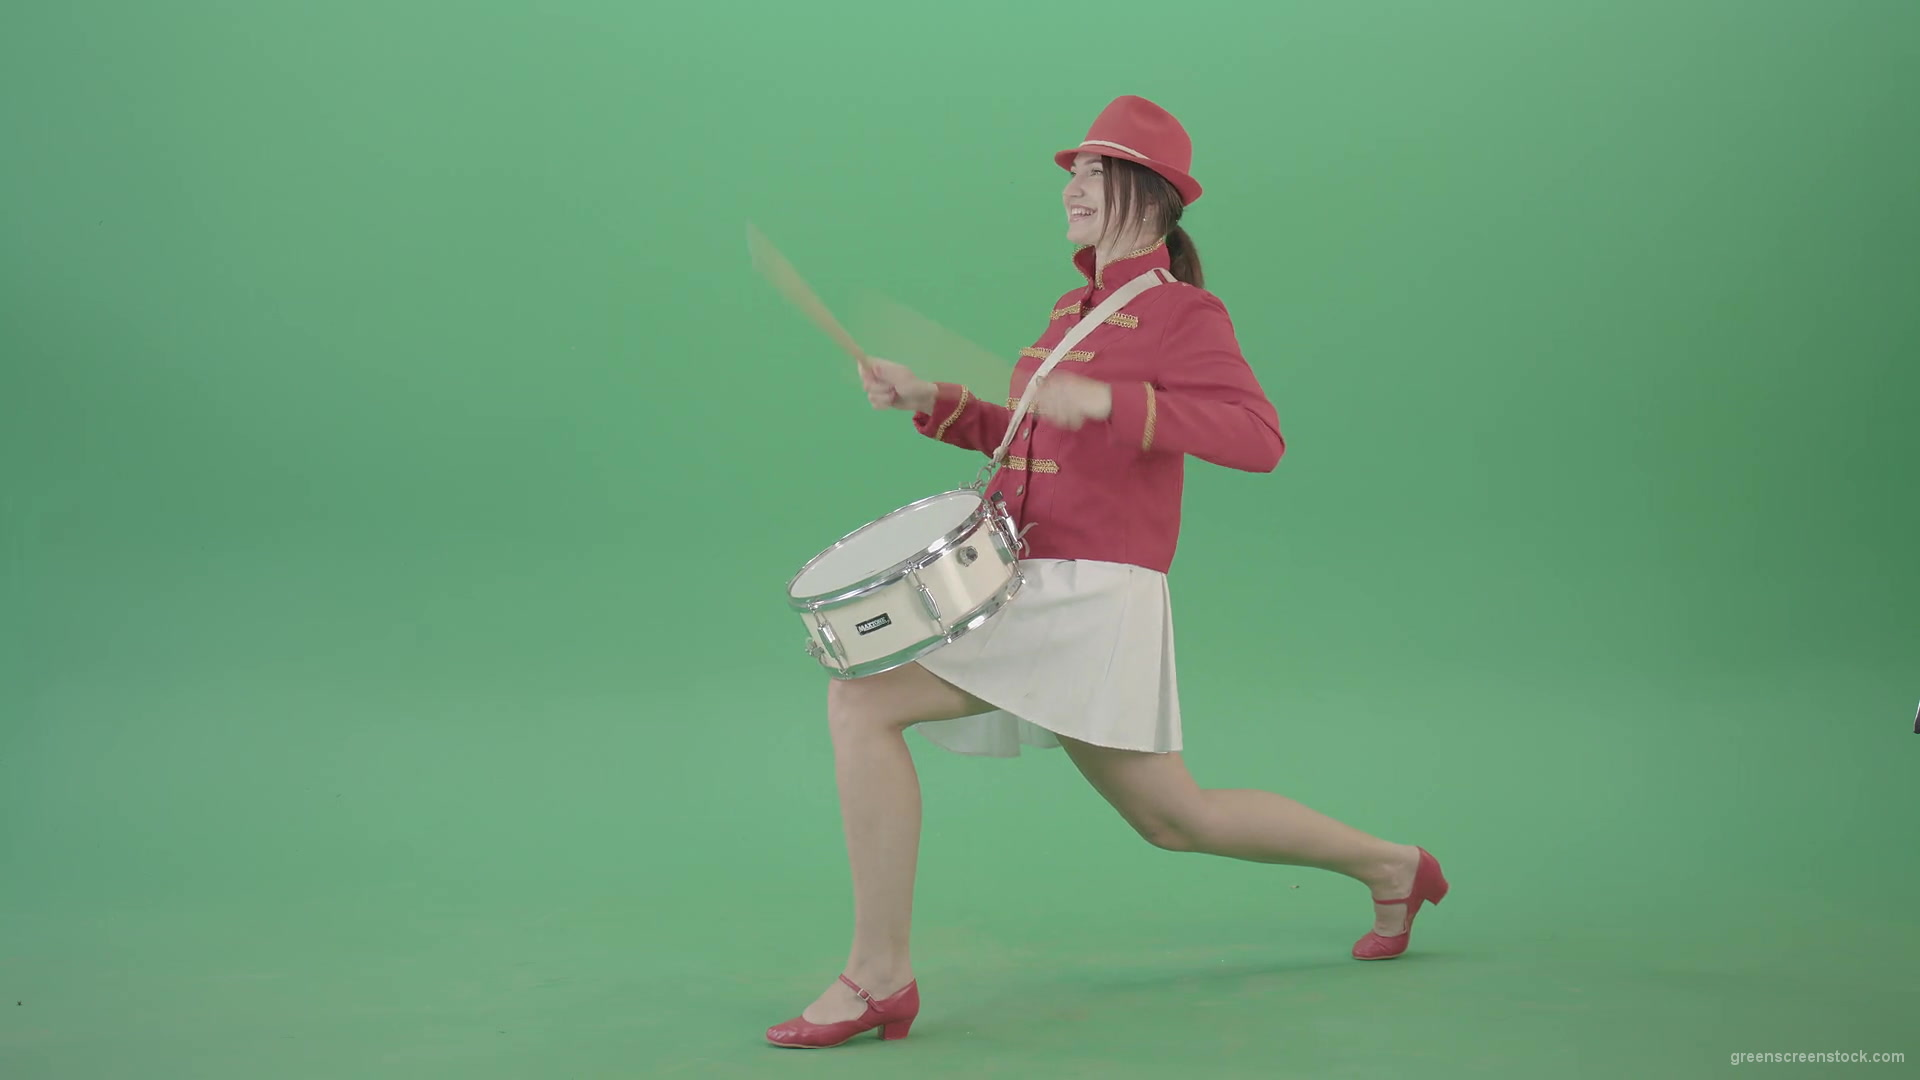 Stupid-funny-advertising-video-footage-with-drumming-girl-isolated-on-green-screen-4K-Video-Footage-1920_007 Green Screen Stock